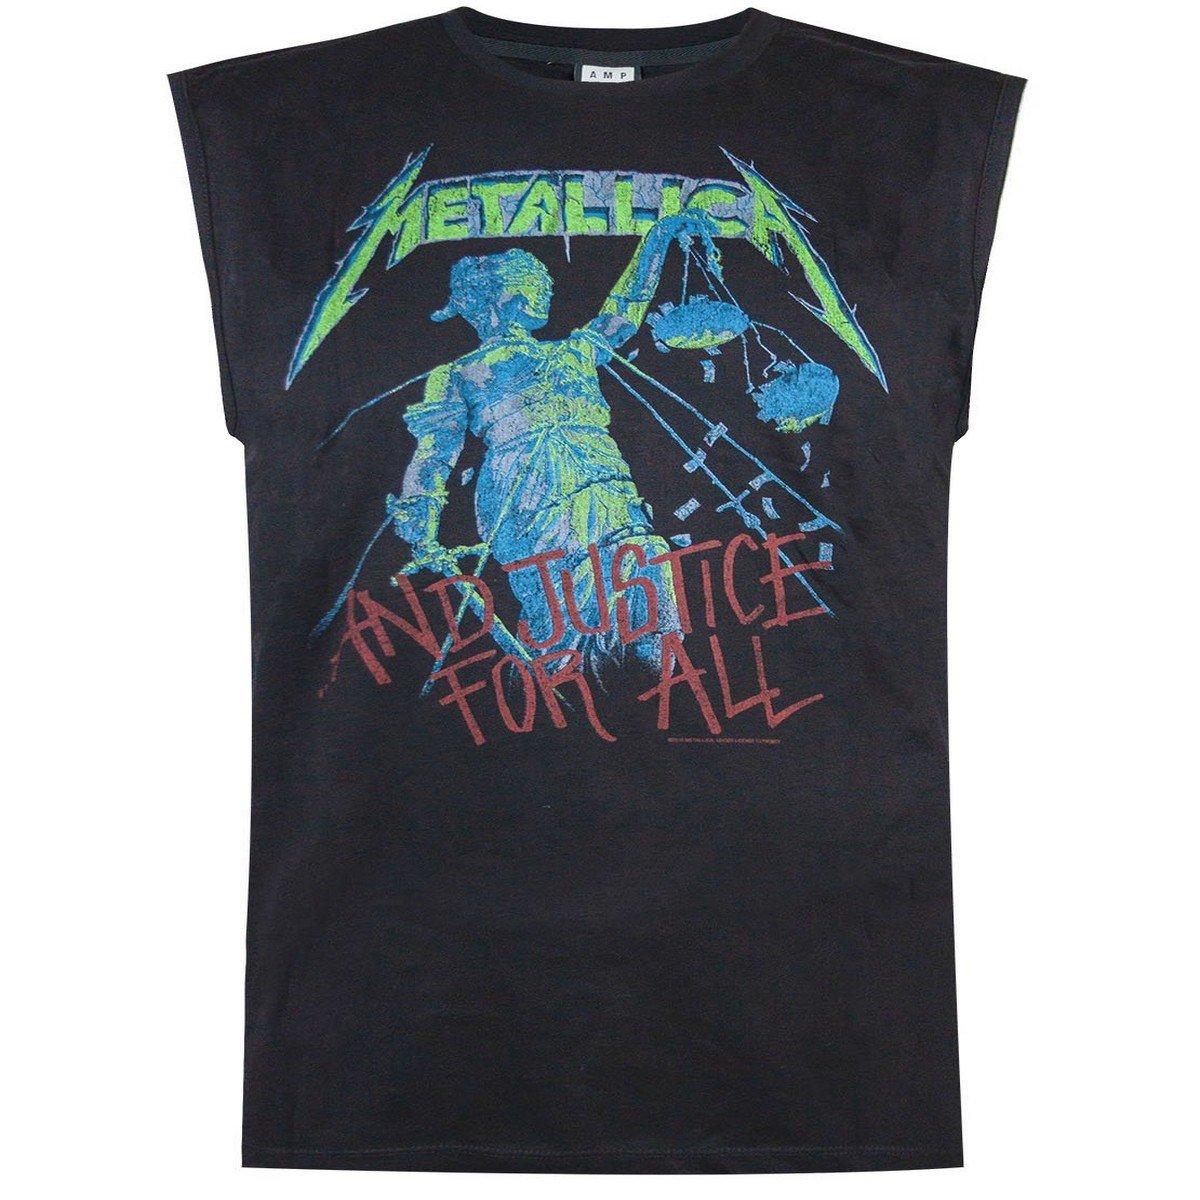 Image of Amplified "Justice For All" TShirt - XS